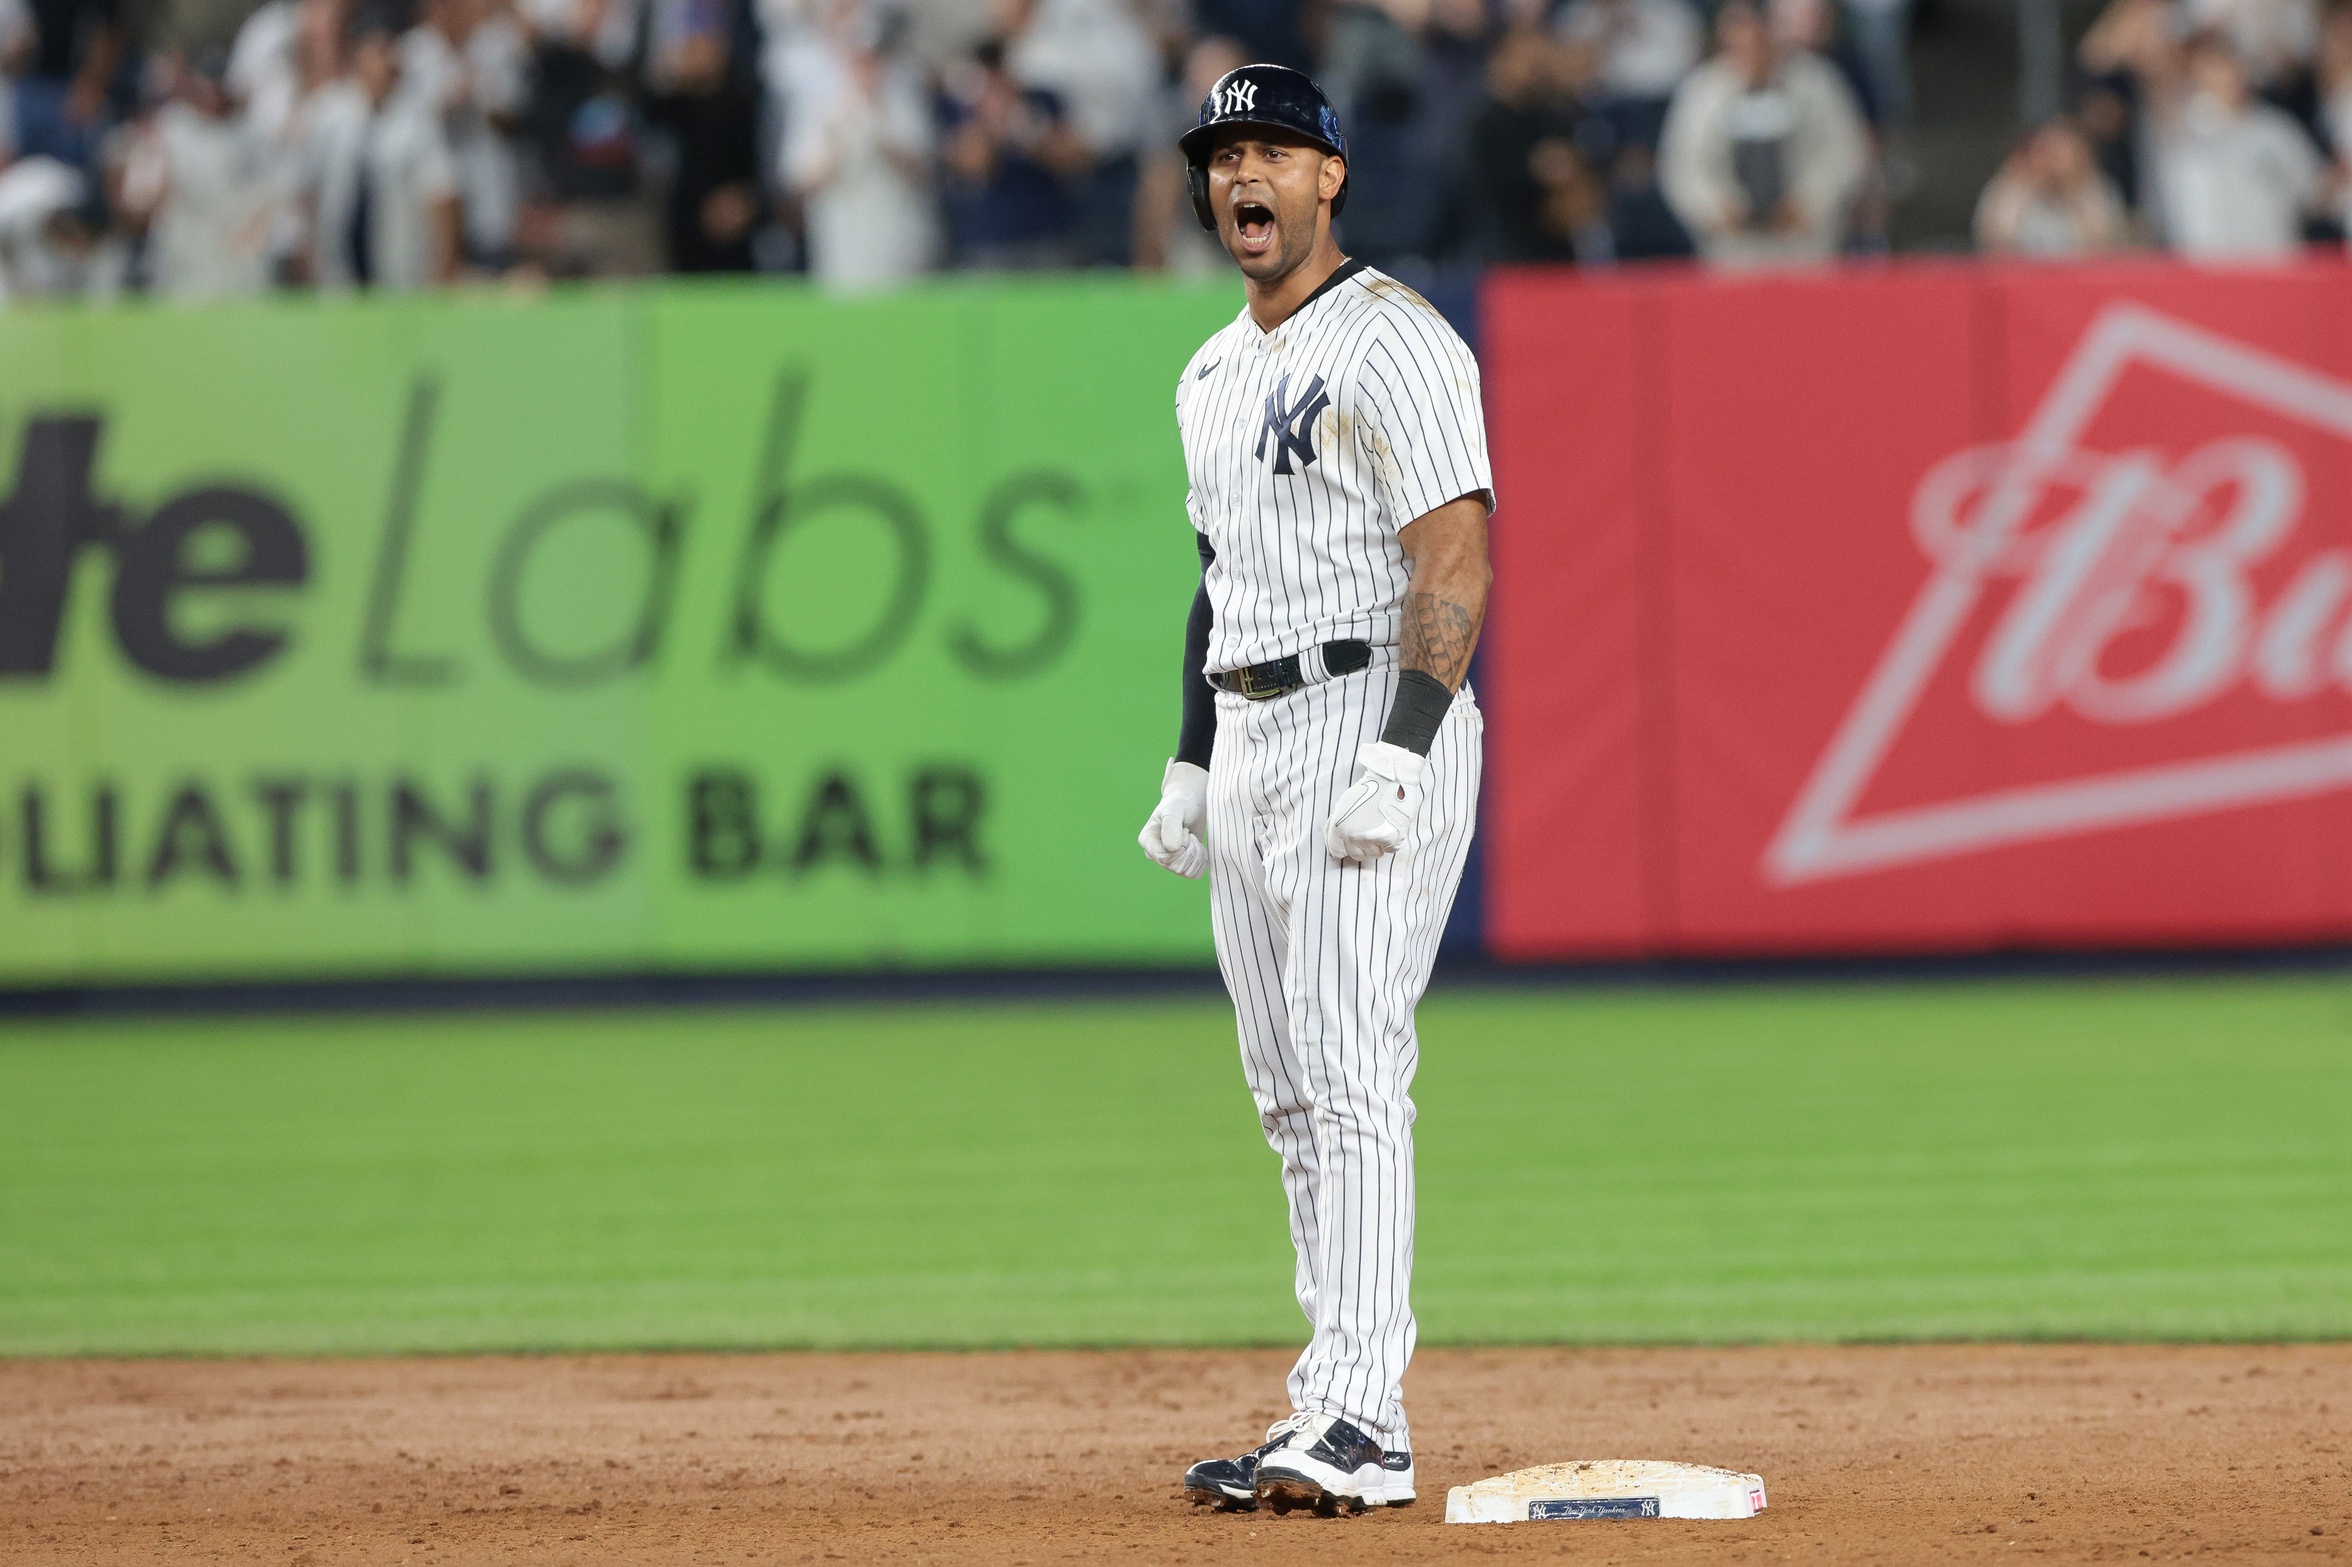 ICYMI: New York Yankees outfielder makes an outlandish leaping